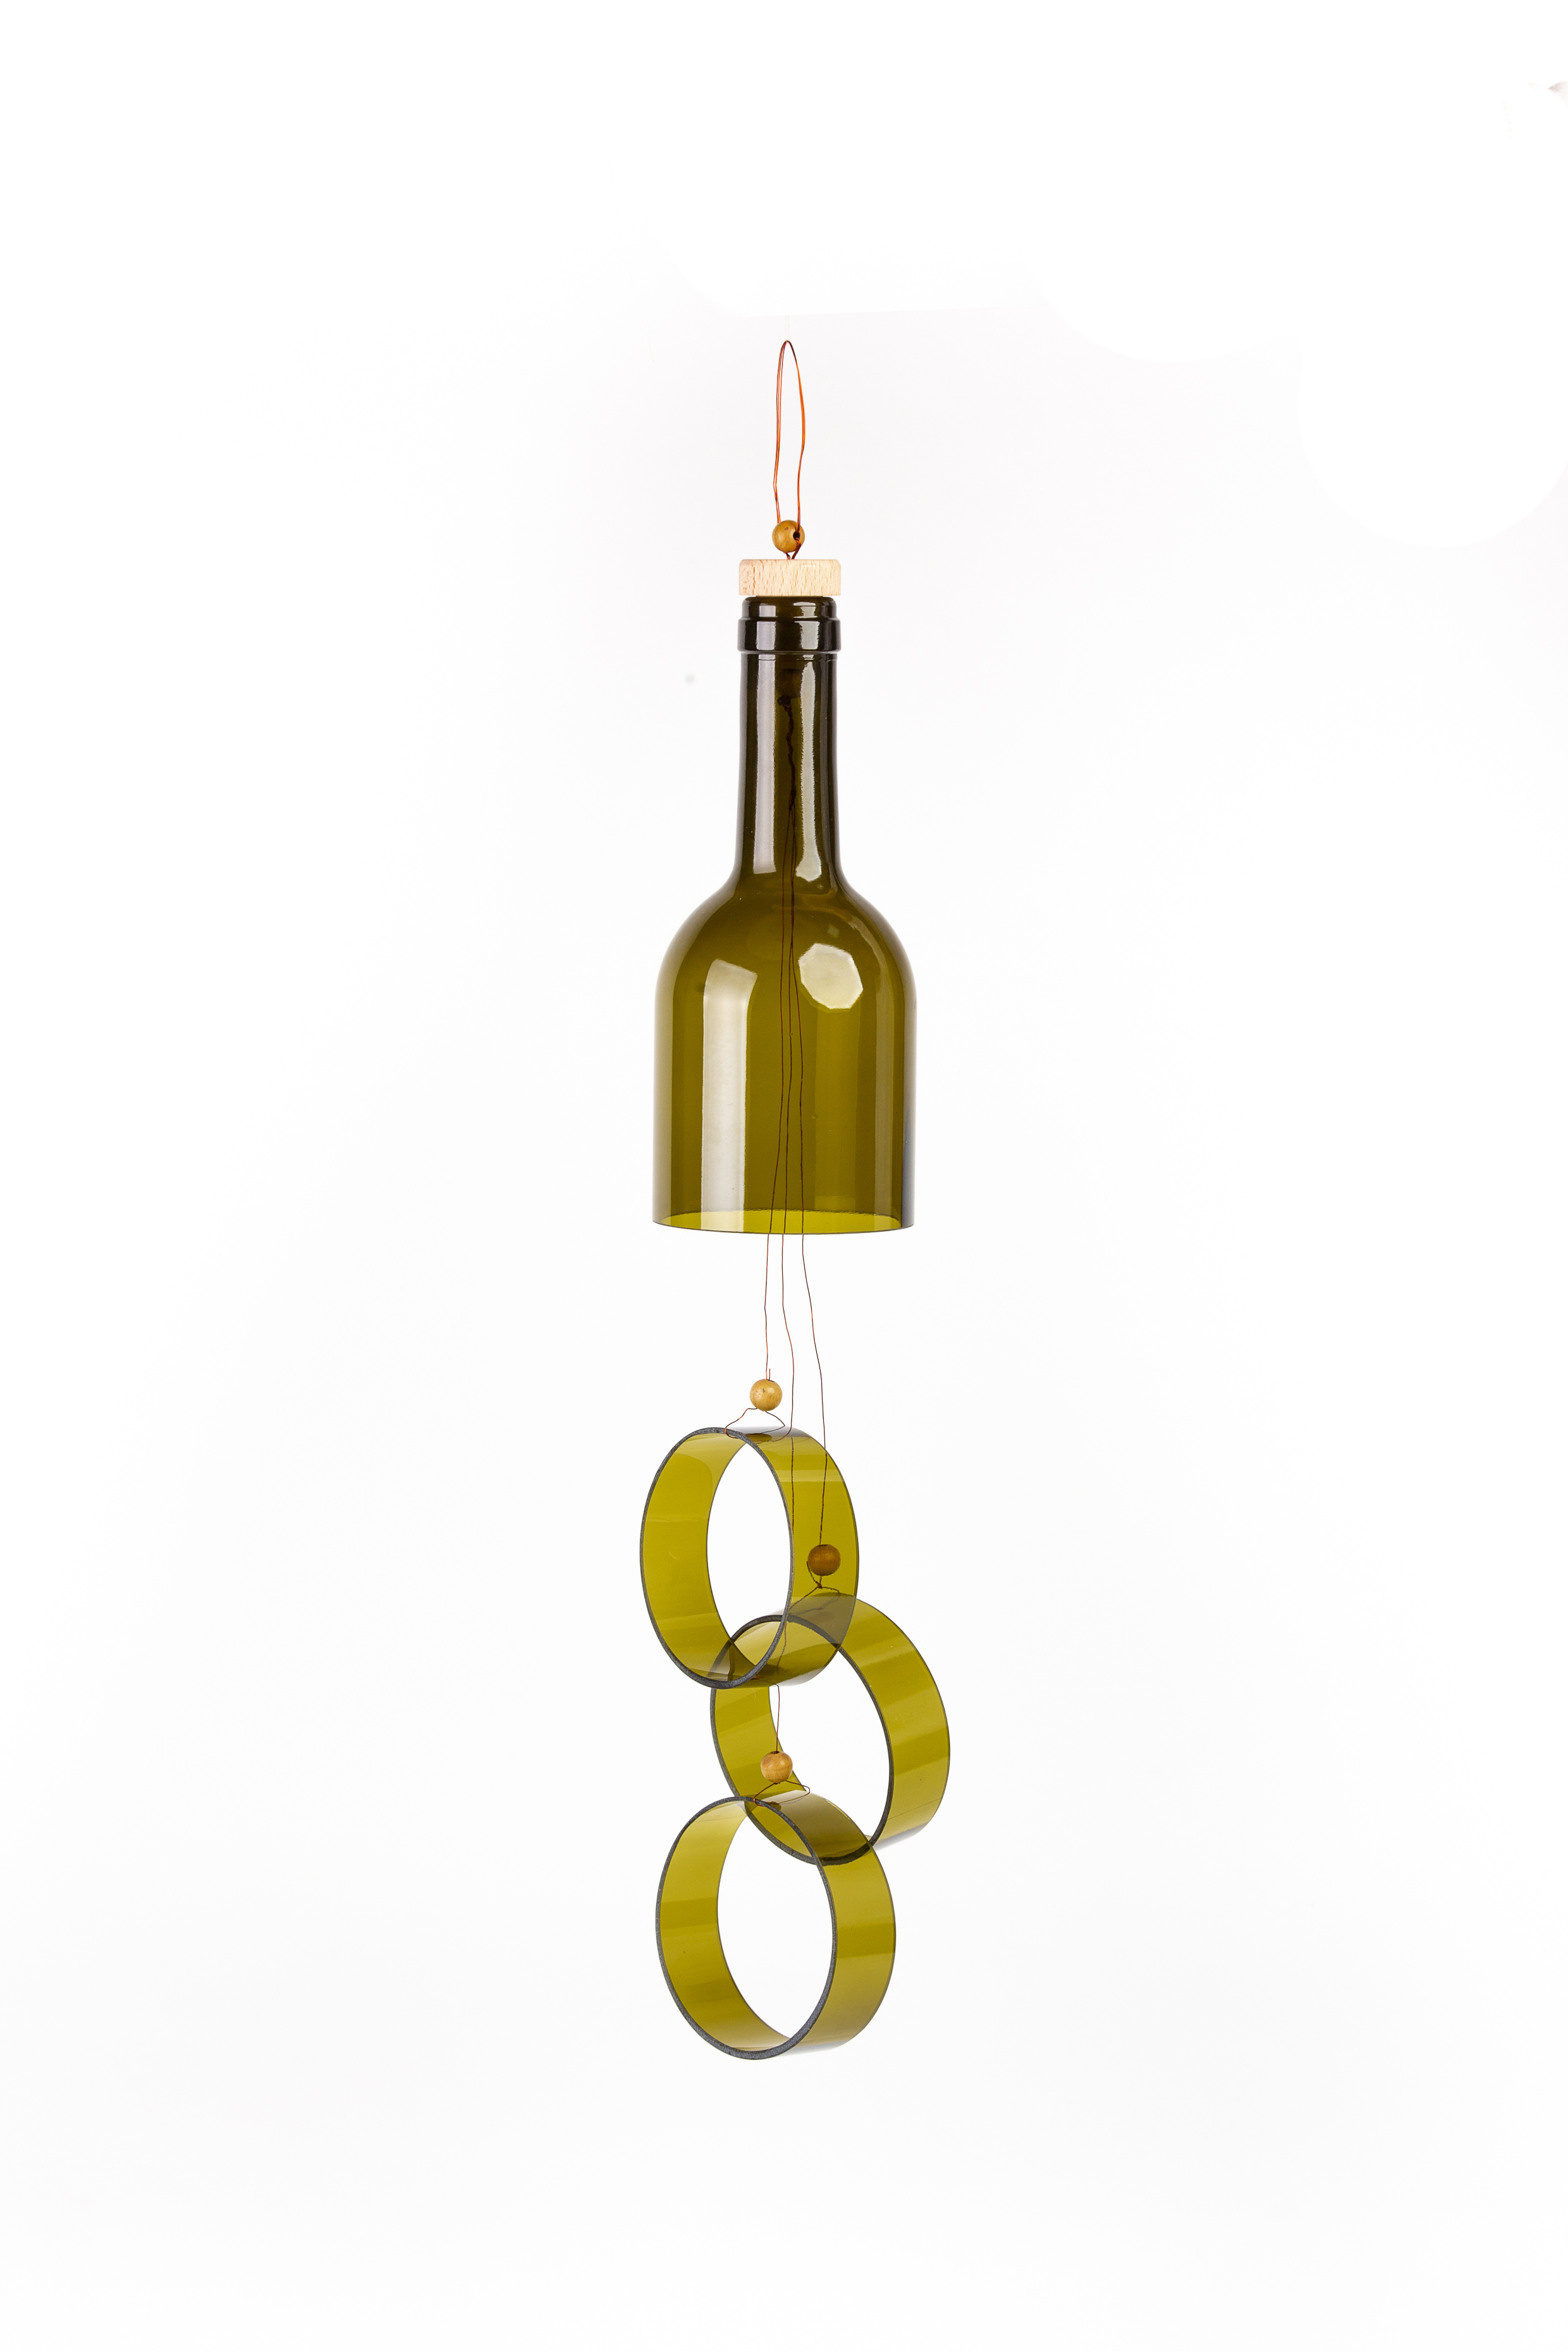 Glass wind chime - antique green